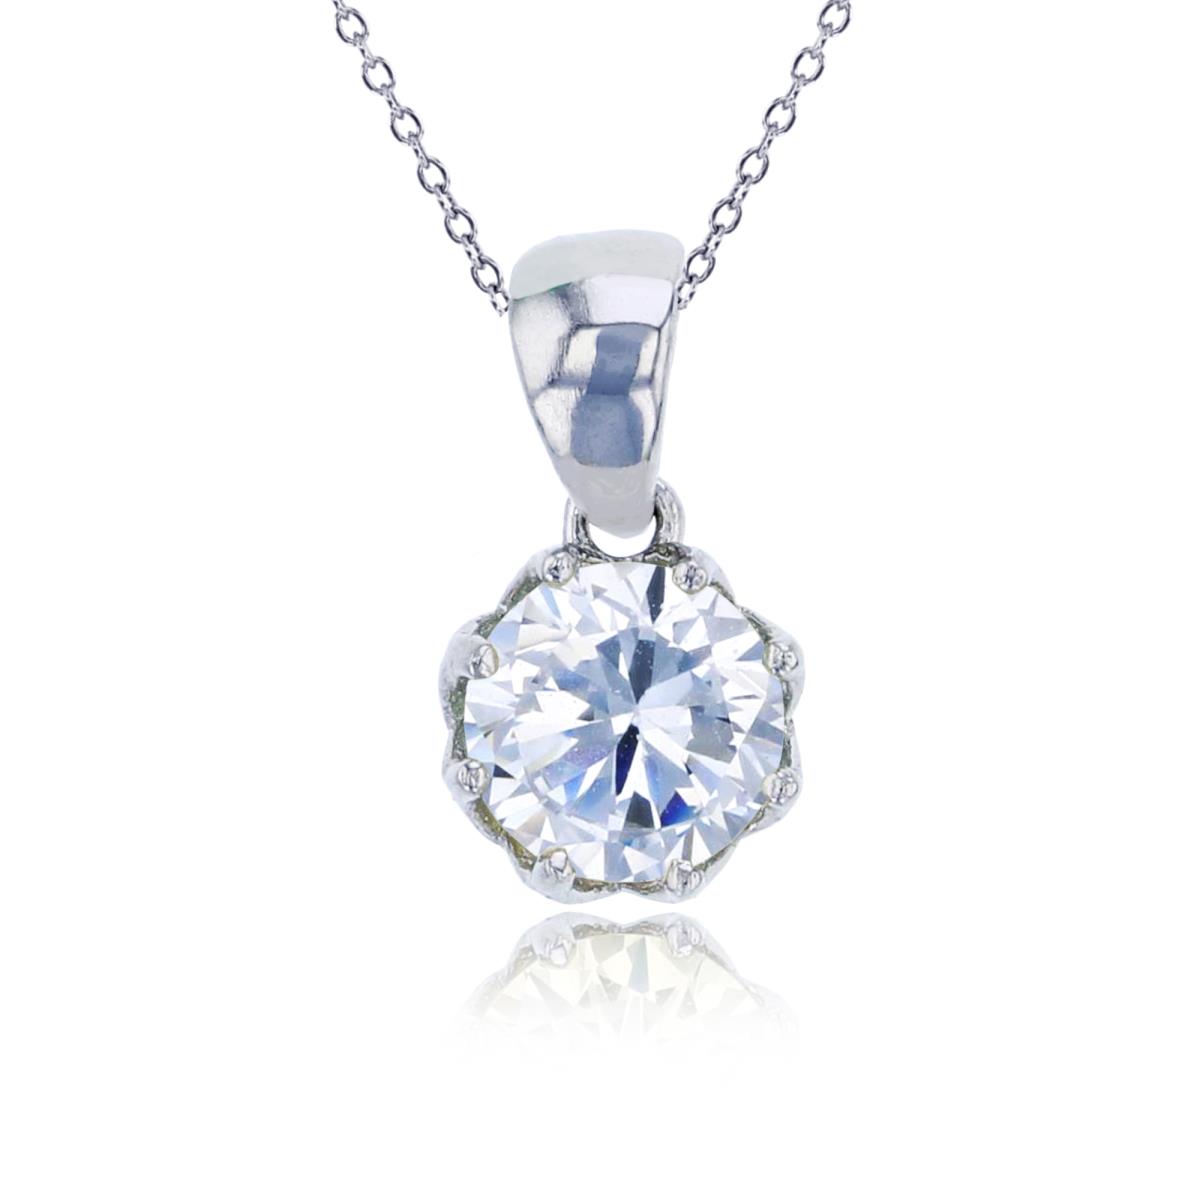 Sterling Silver Rhodium 6mm White Round Cut CZ Solitaire Dangling 18" Necklace